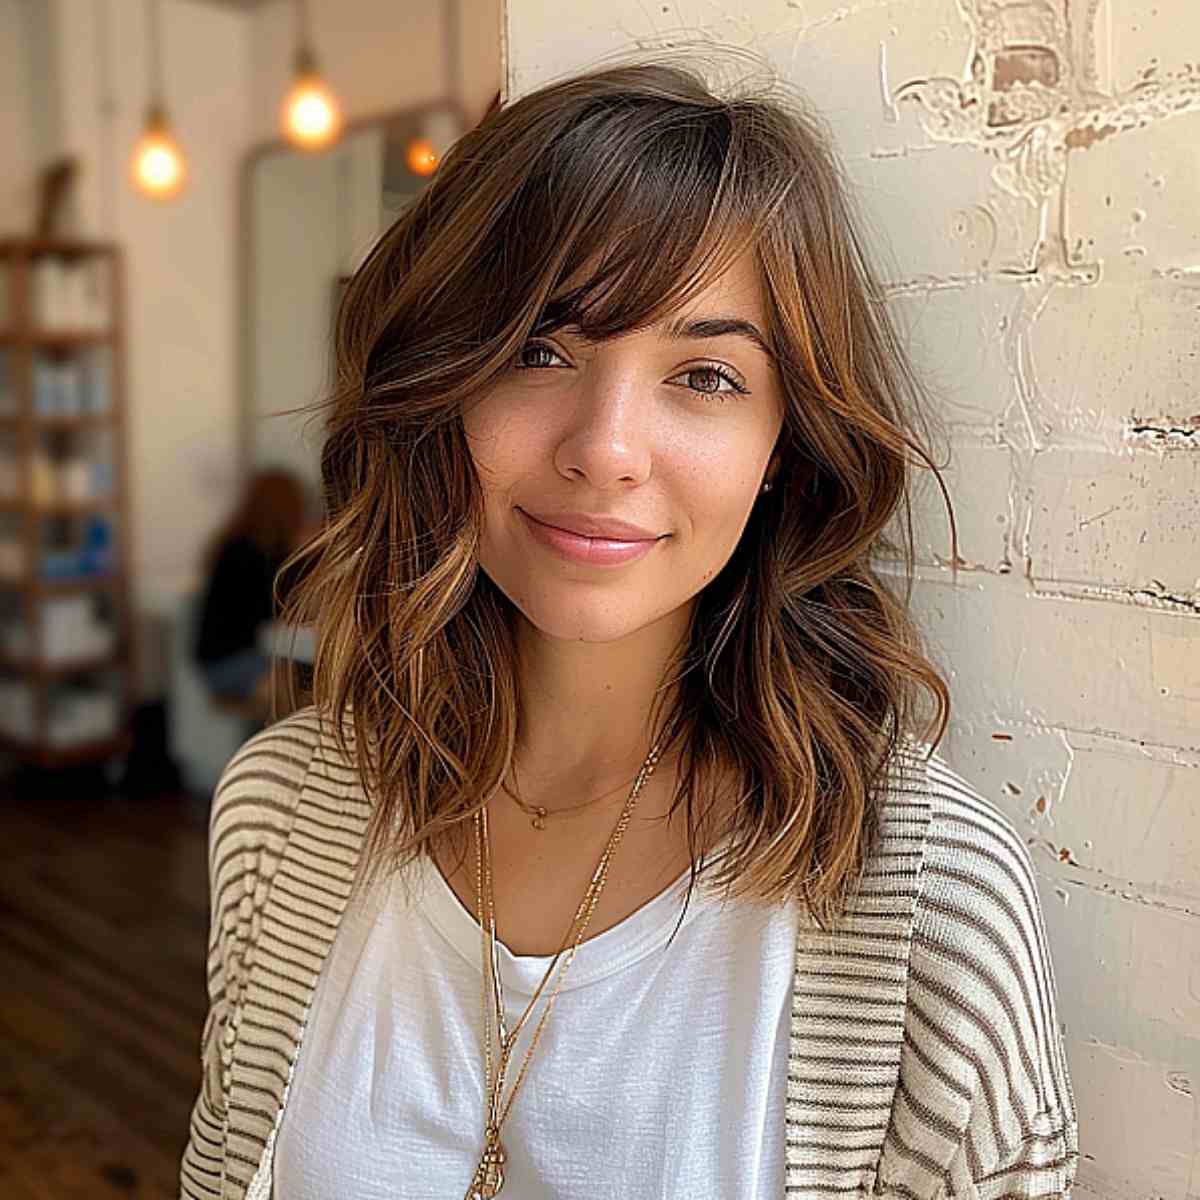 Best Haircuts For Round Faces, According to a Hairstylist | POPSUGAR Beauty